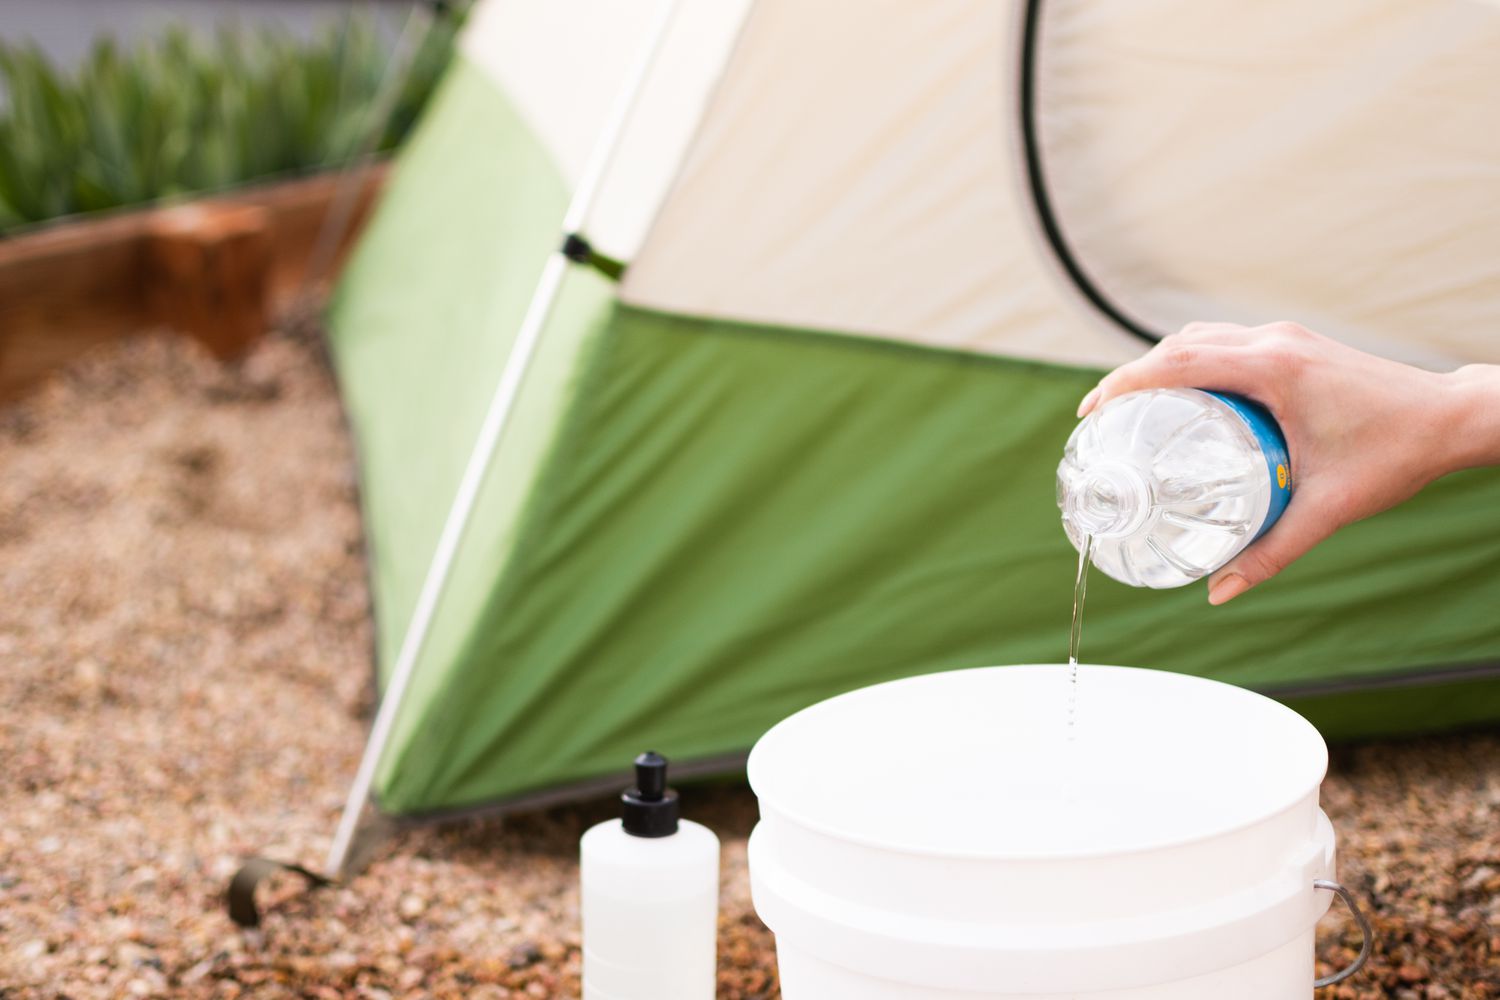 Distilled white vinegar and dishwashing liquid mixed with water in white bucket for tent cleaning solution